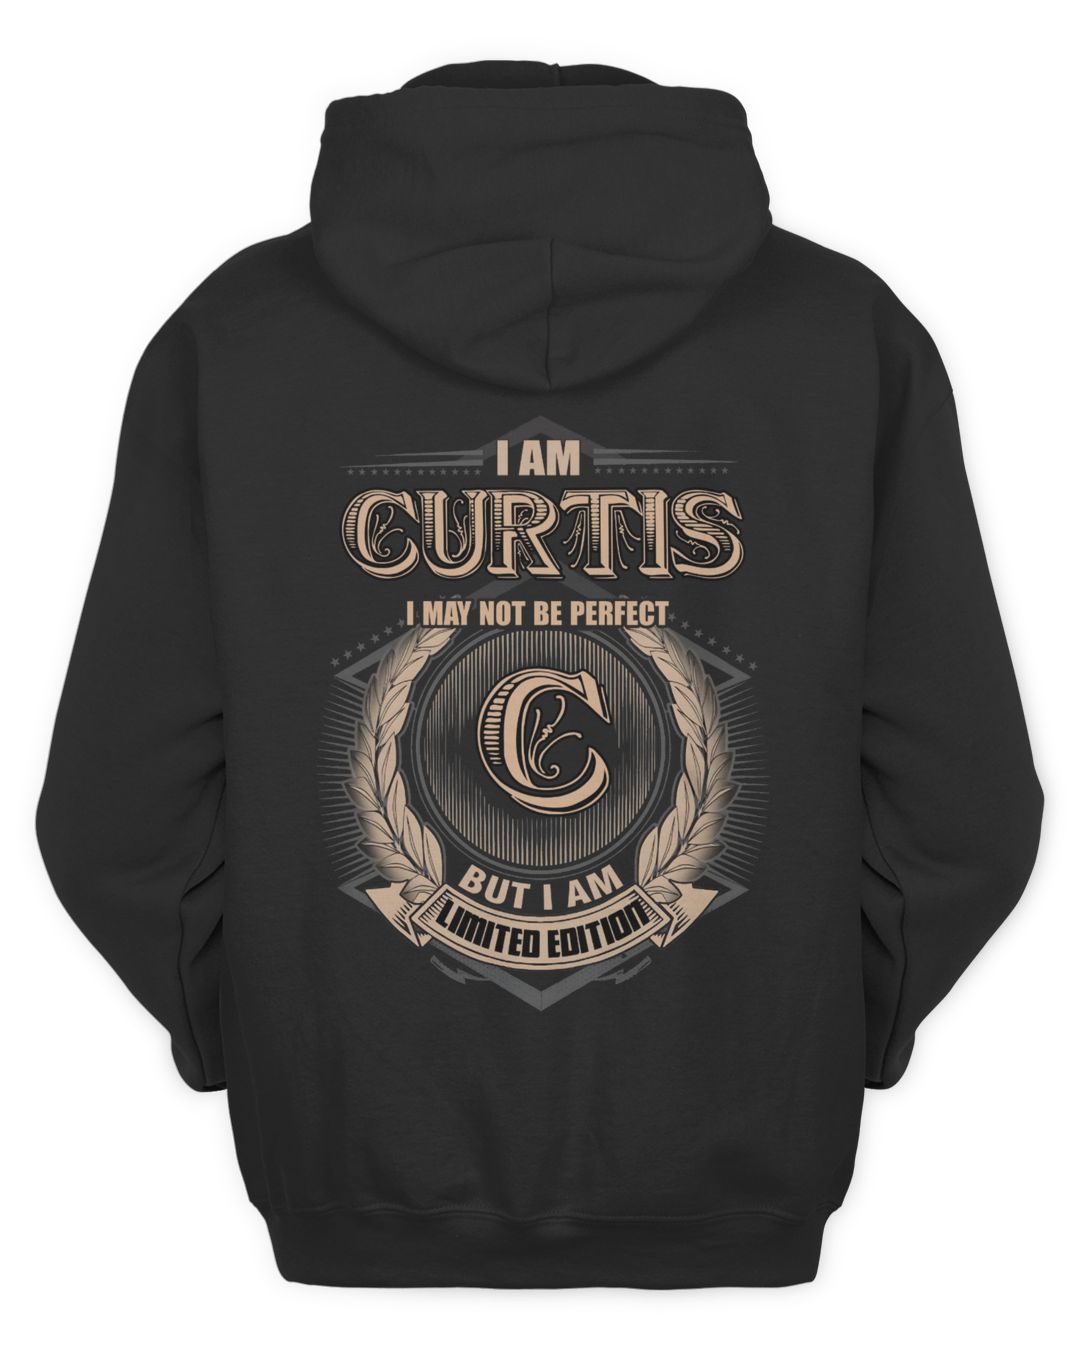 CURTIS LIMITED EDITION | Mystyle-store.com: Personalized Gifts & Unique ...